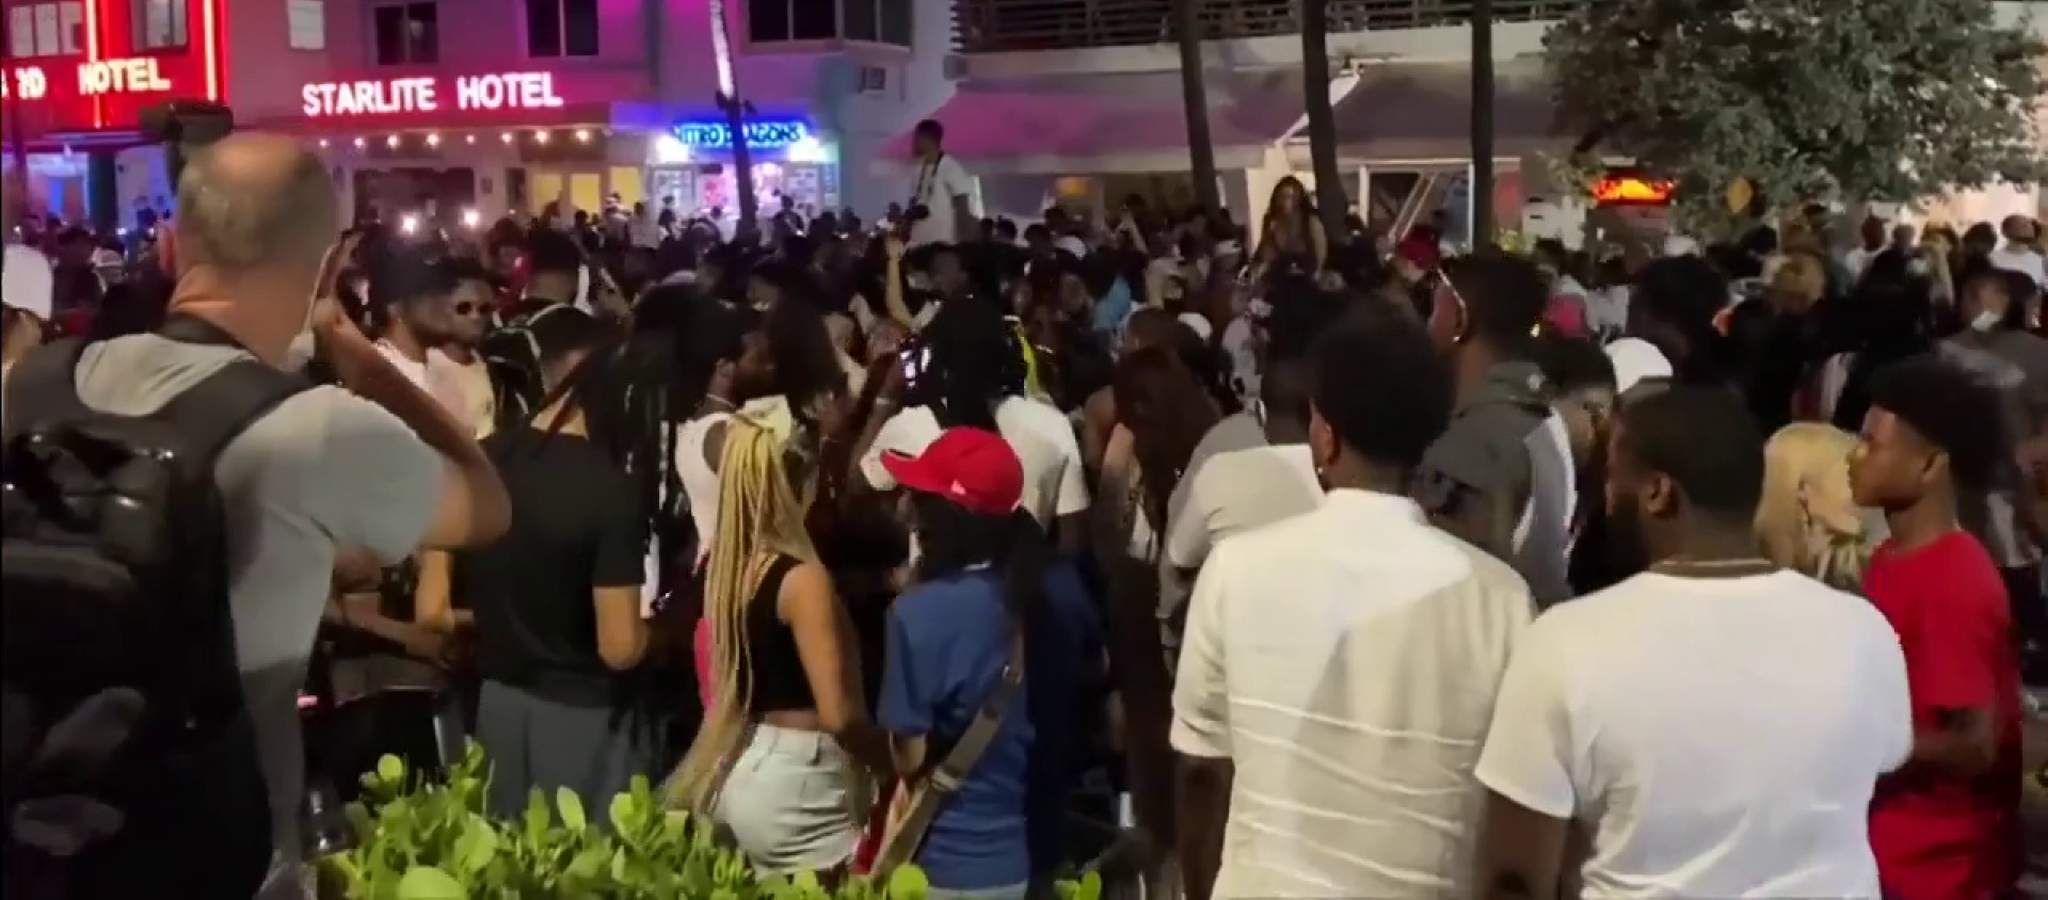 Miami sets early curfew after spring break crowds, fights